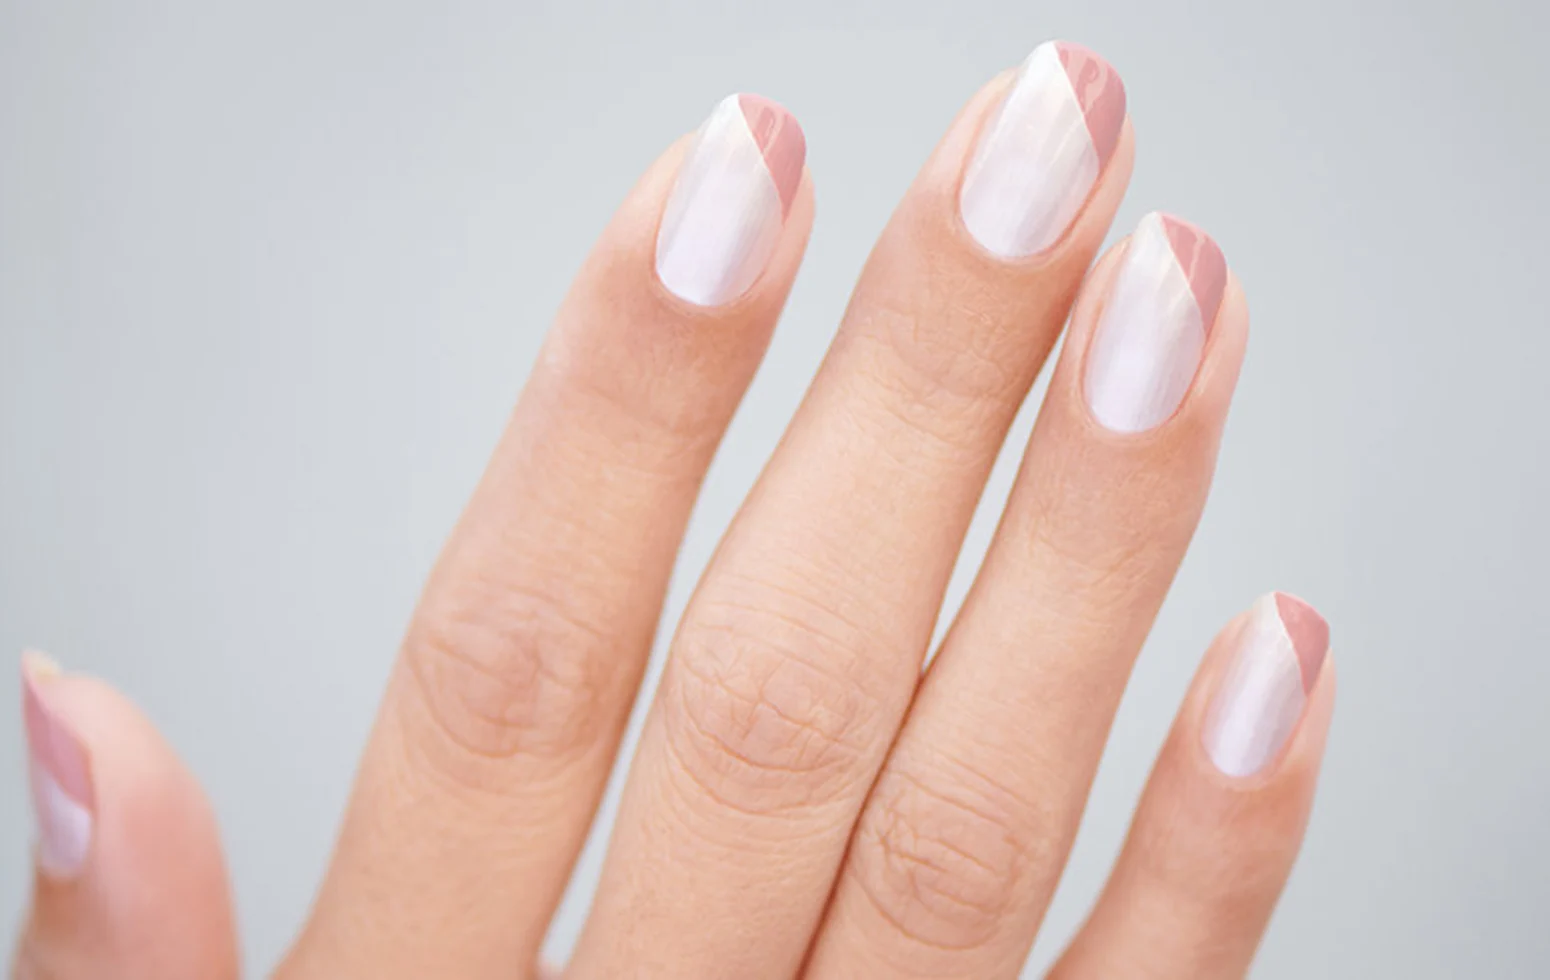 A Modern French Manicure that’s Gram-Worthy